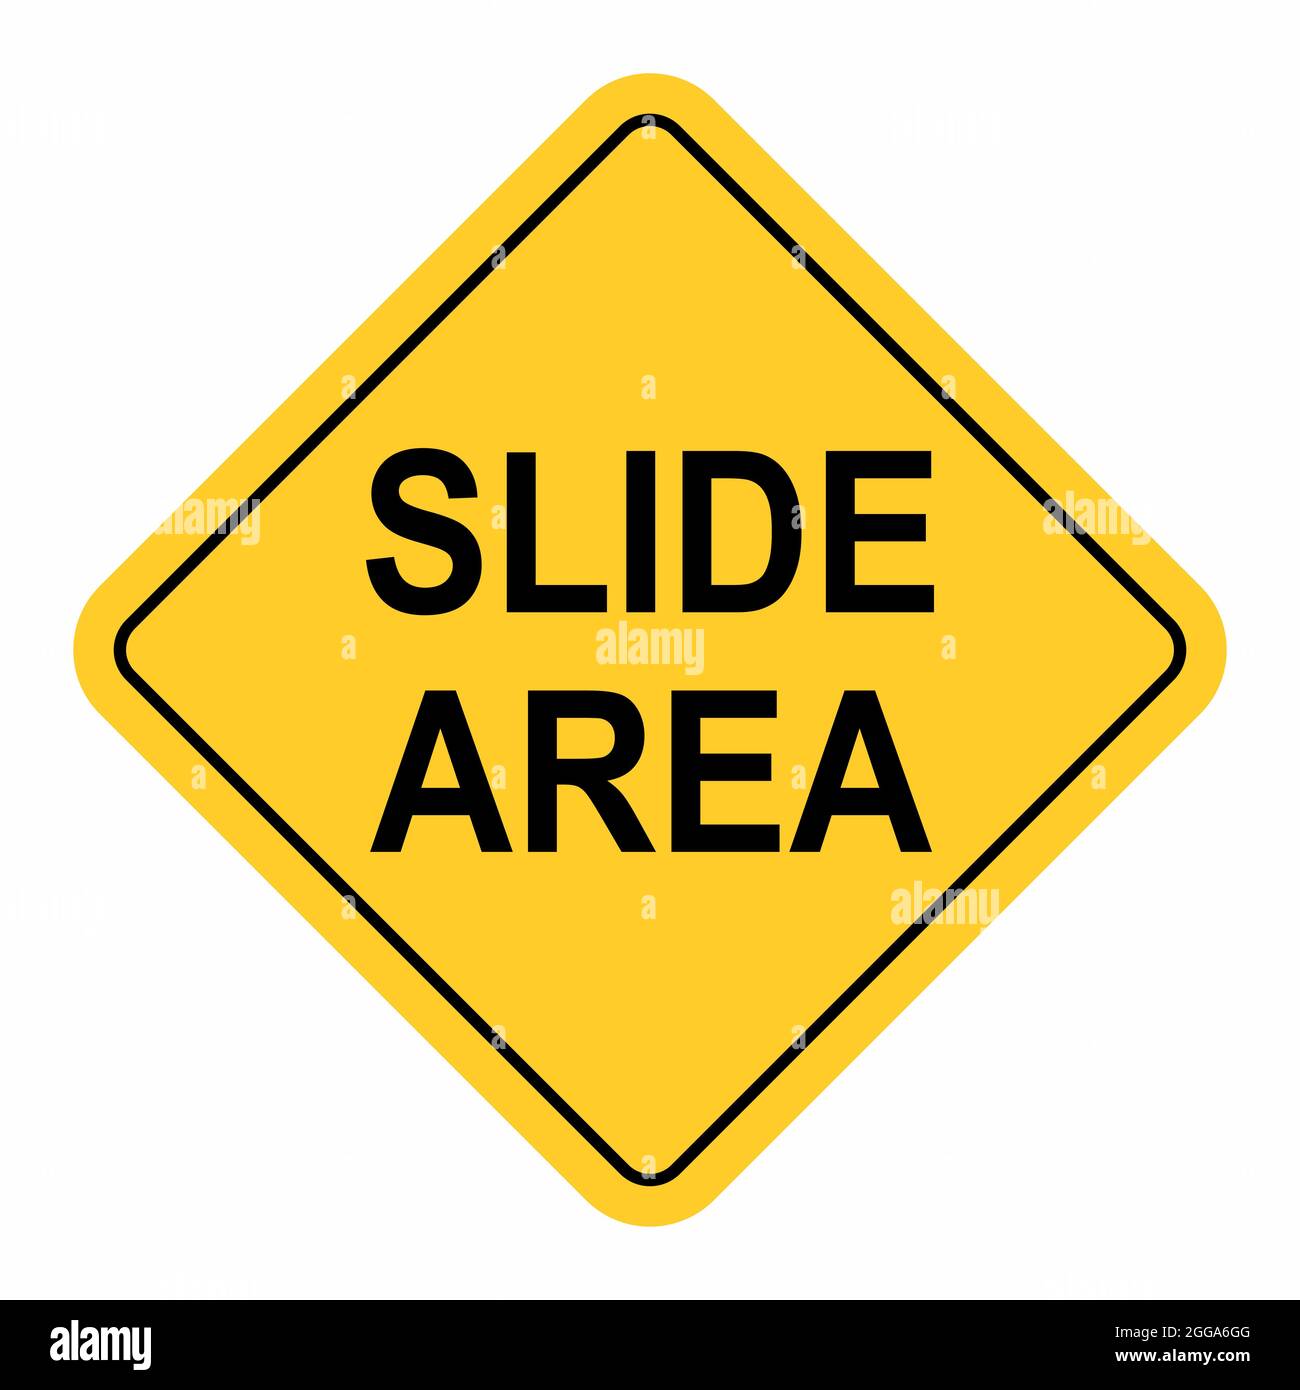 Slide Area traffic sign isolated on white background Stock Vector